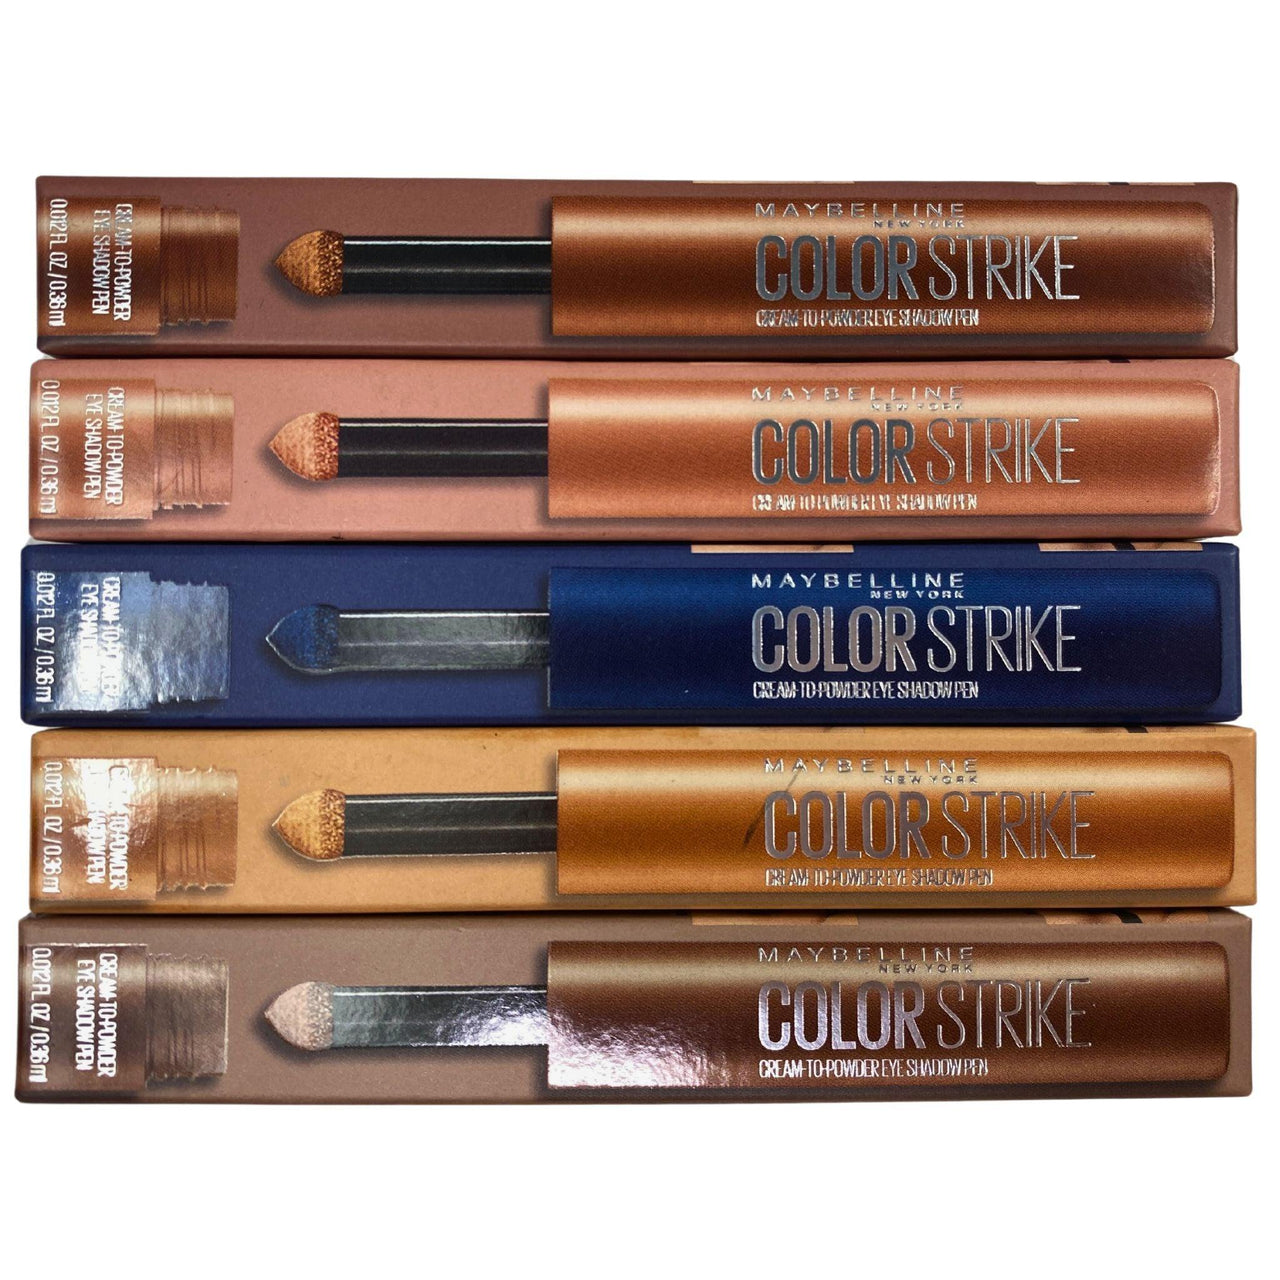 Maybelline Colorstrike Cream to Powder Eye Shadow Pen Assorted Mix 0.012OZ (50 Pcs Lot) - Discount Wholesalers Inc